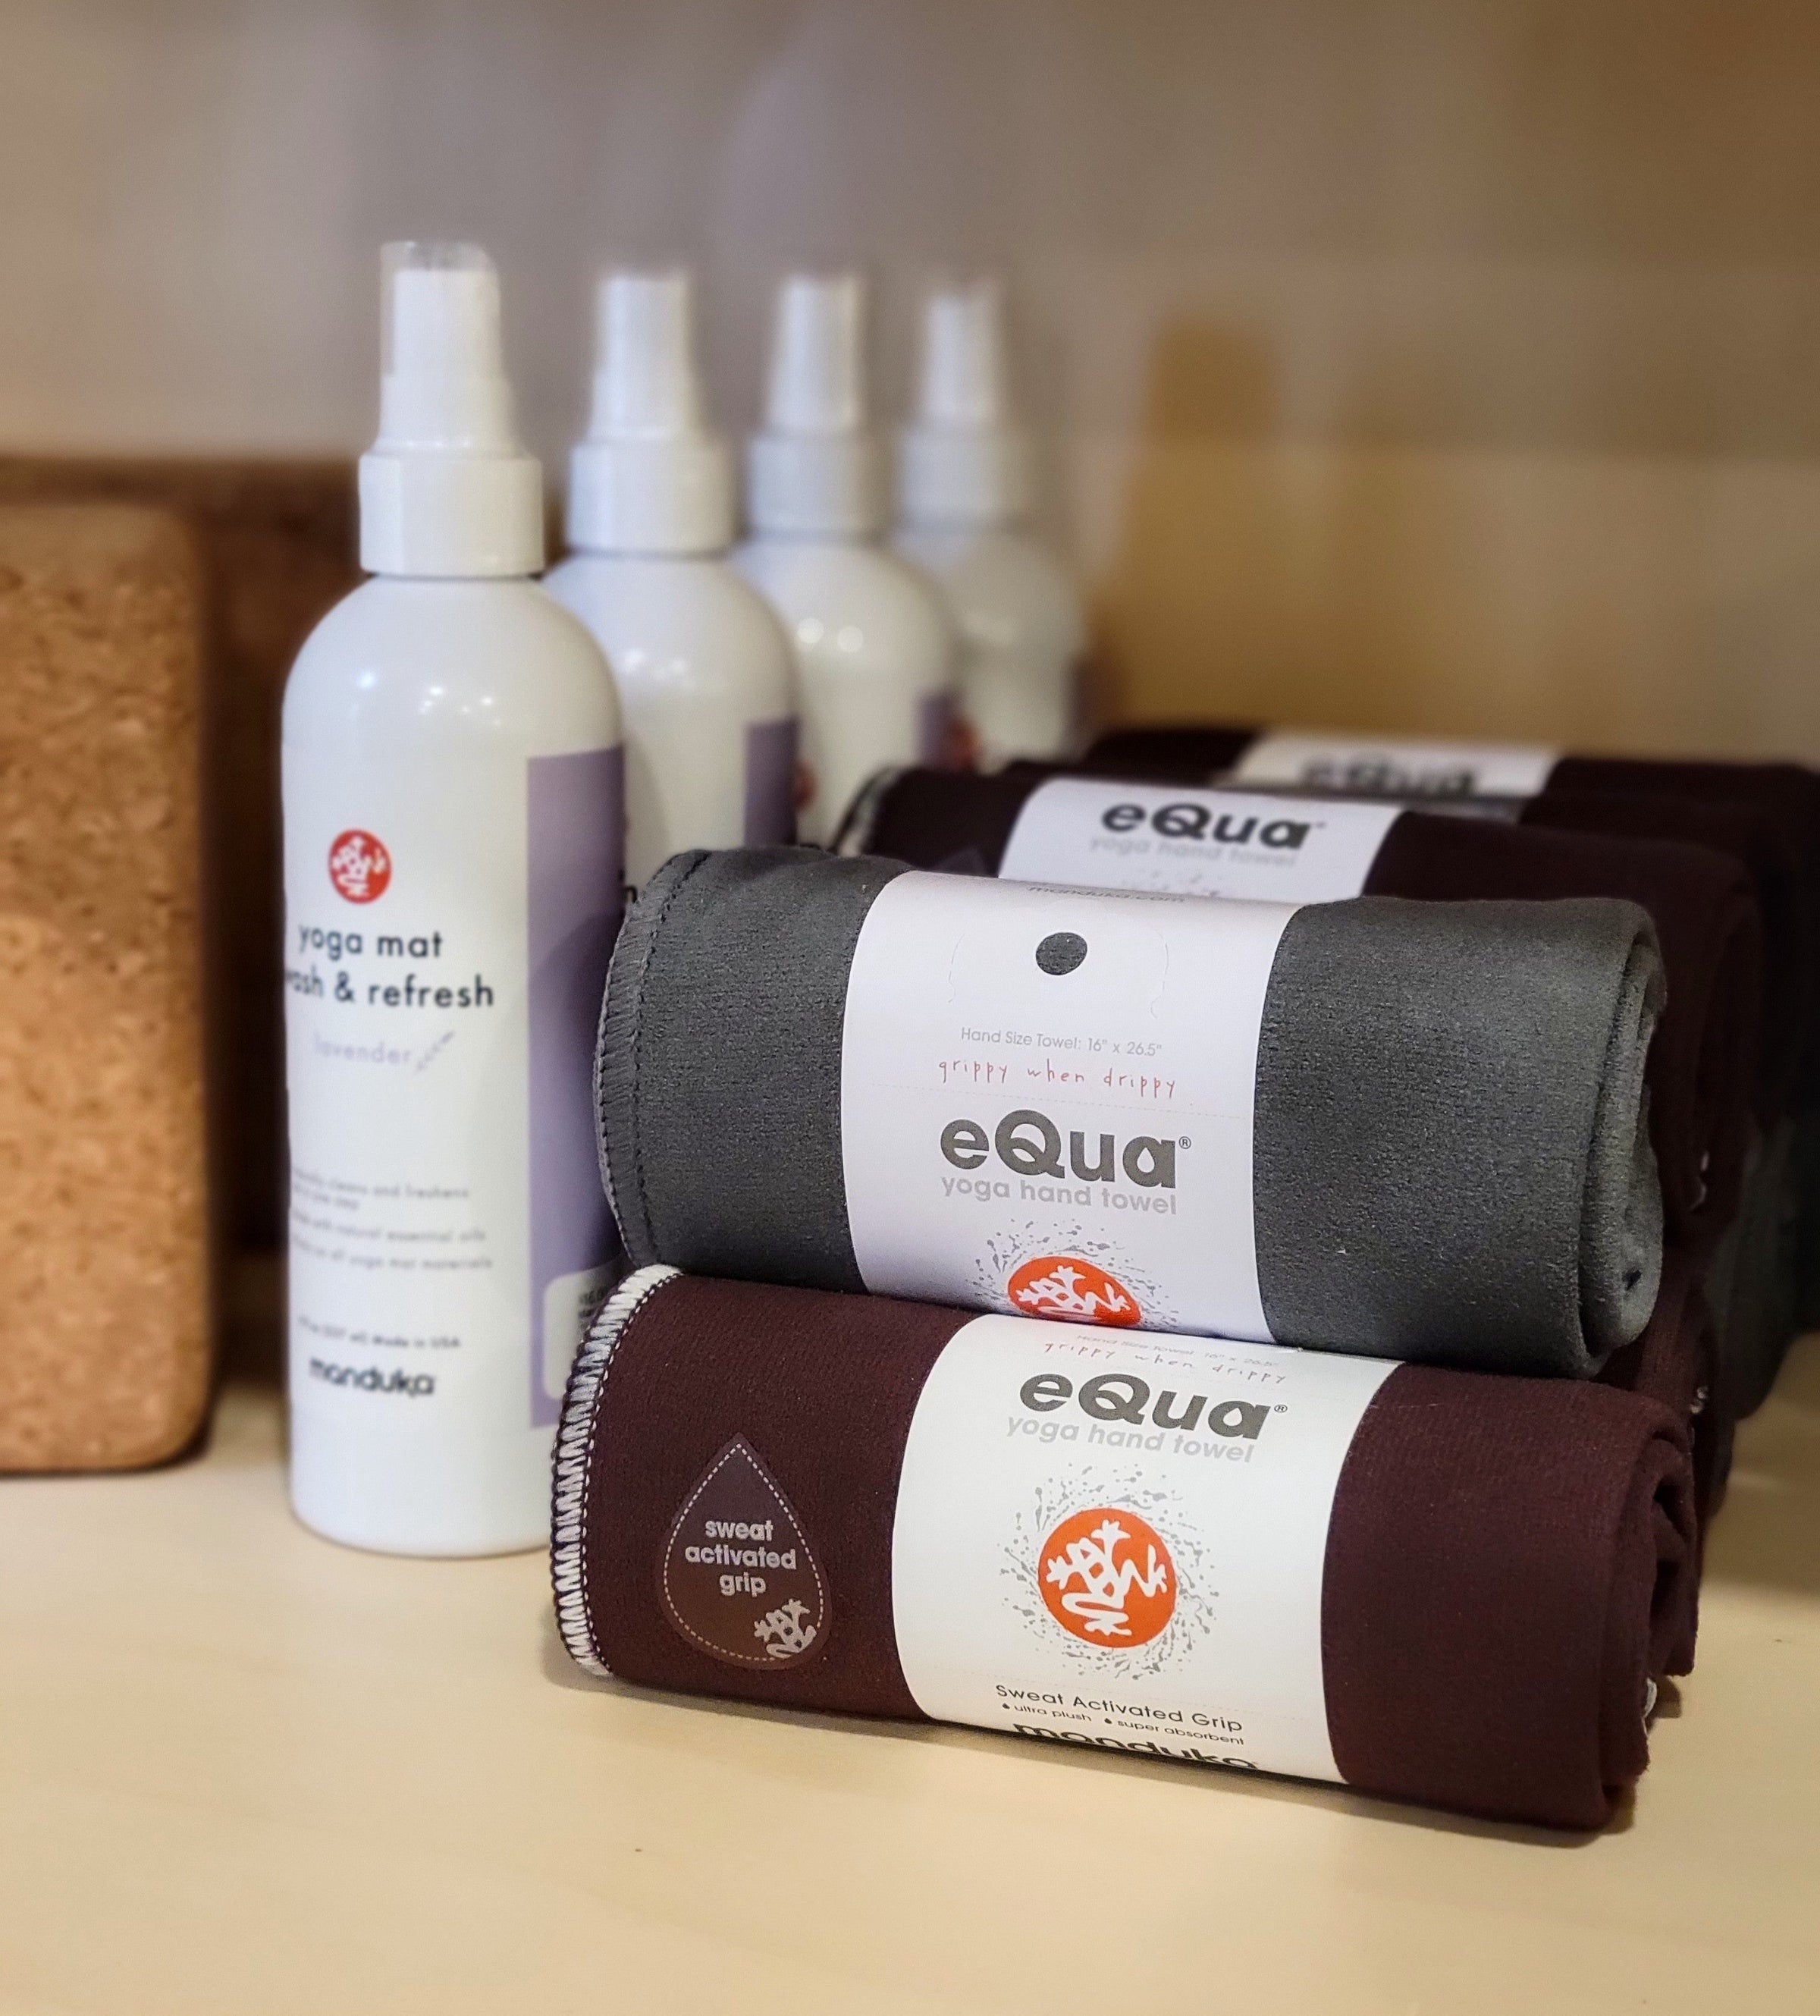 Rolled up yoga towels next to mat spray on a shelf.